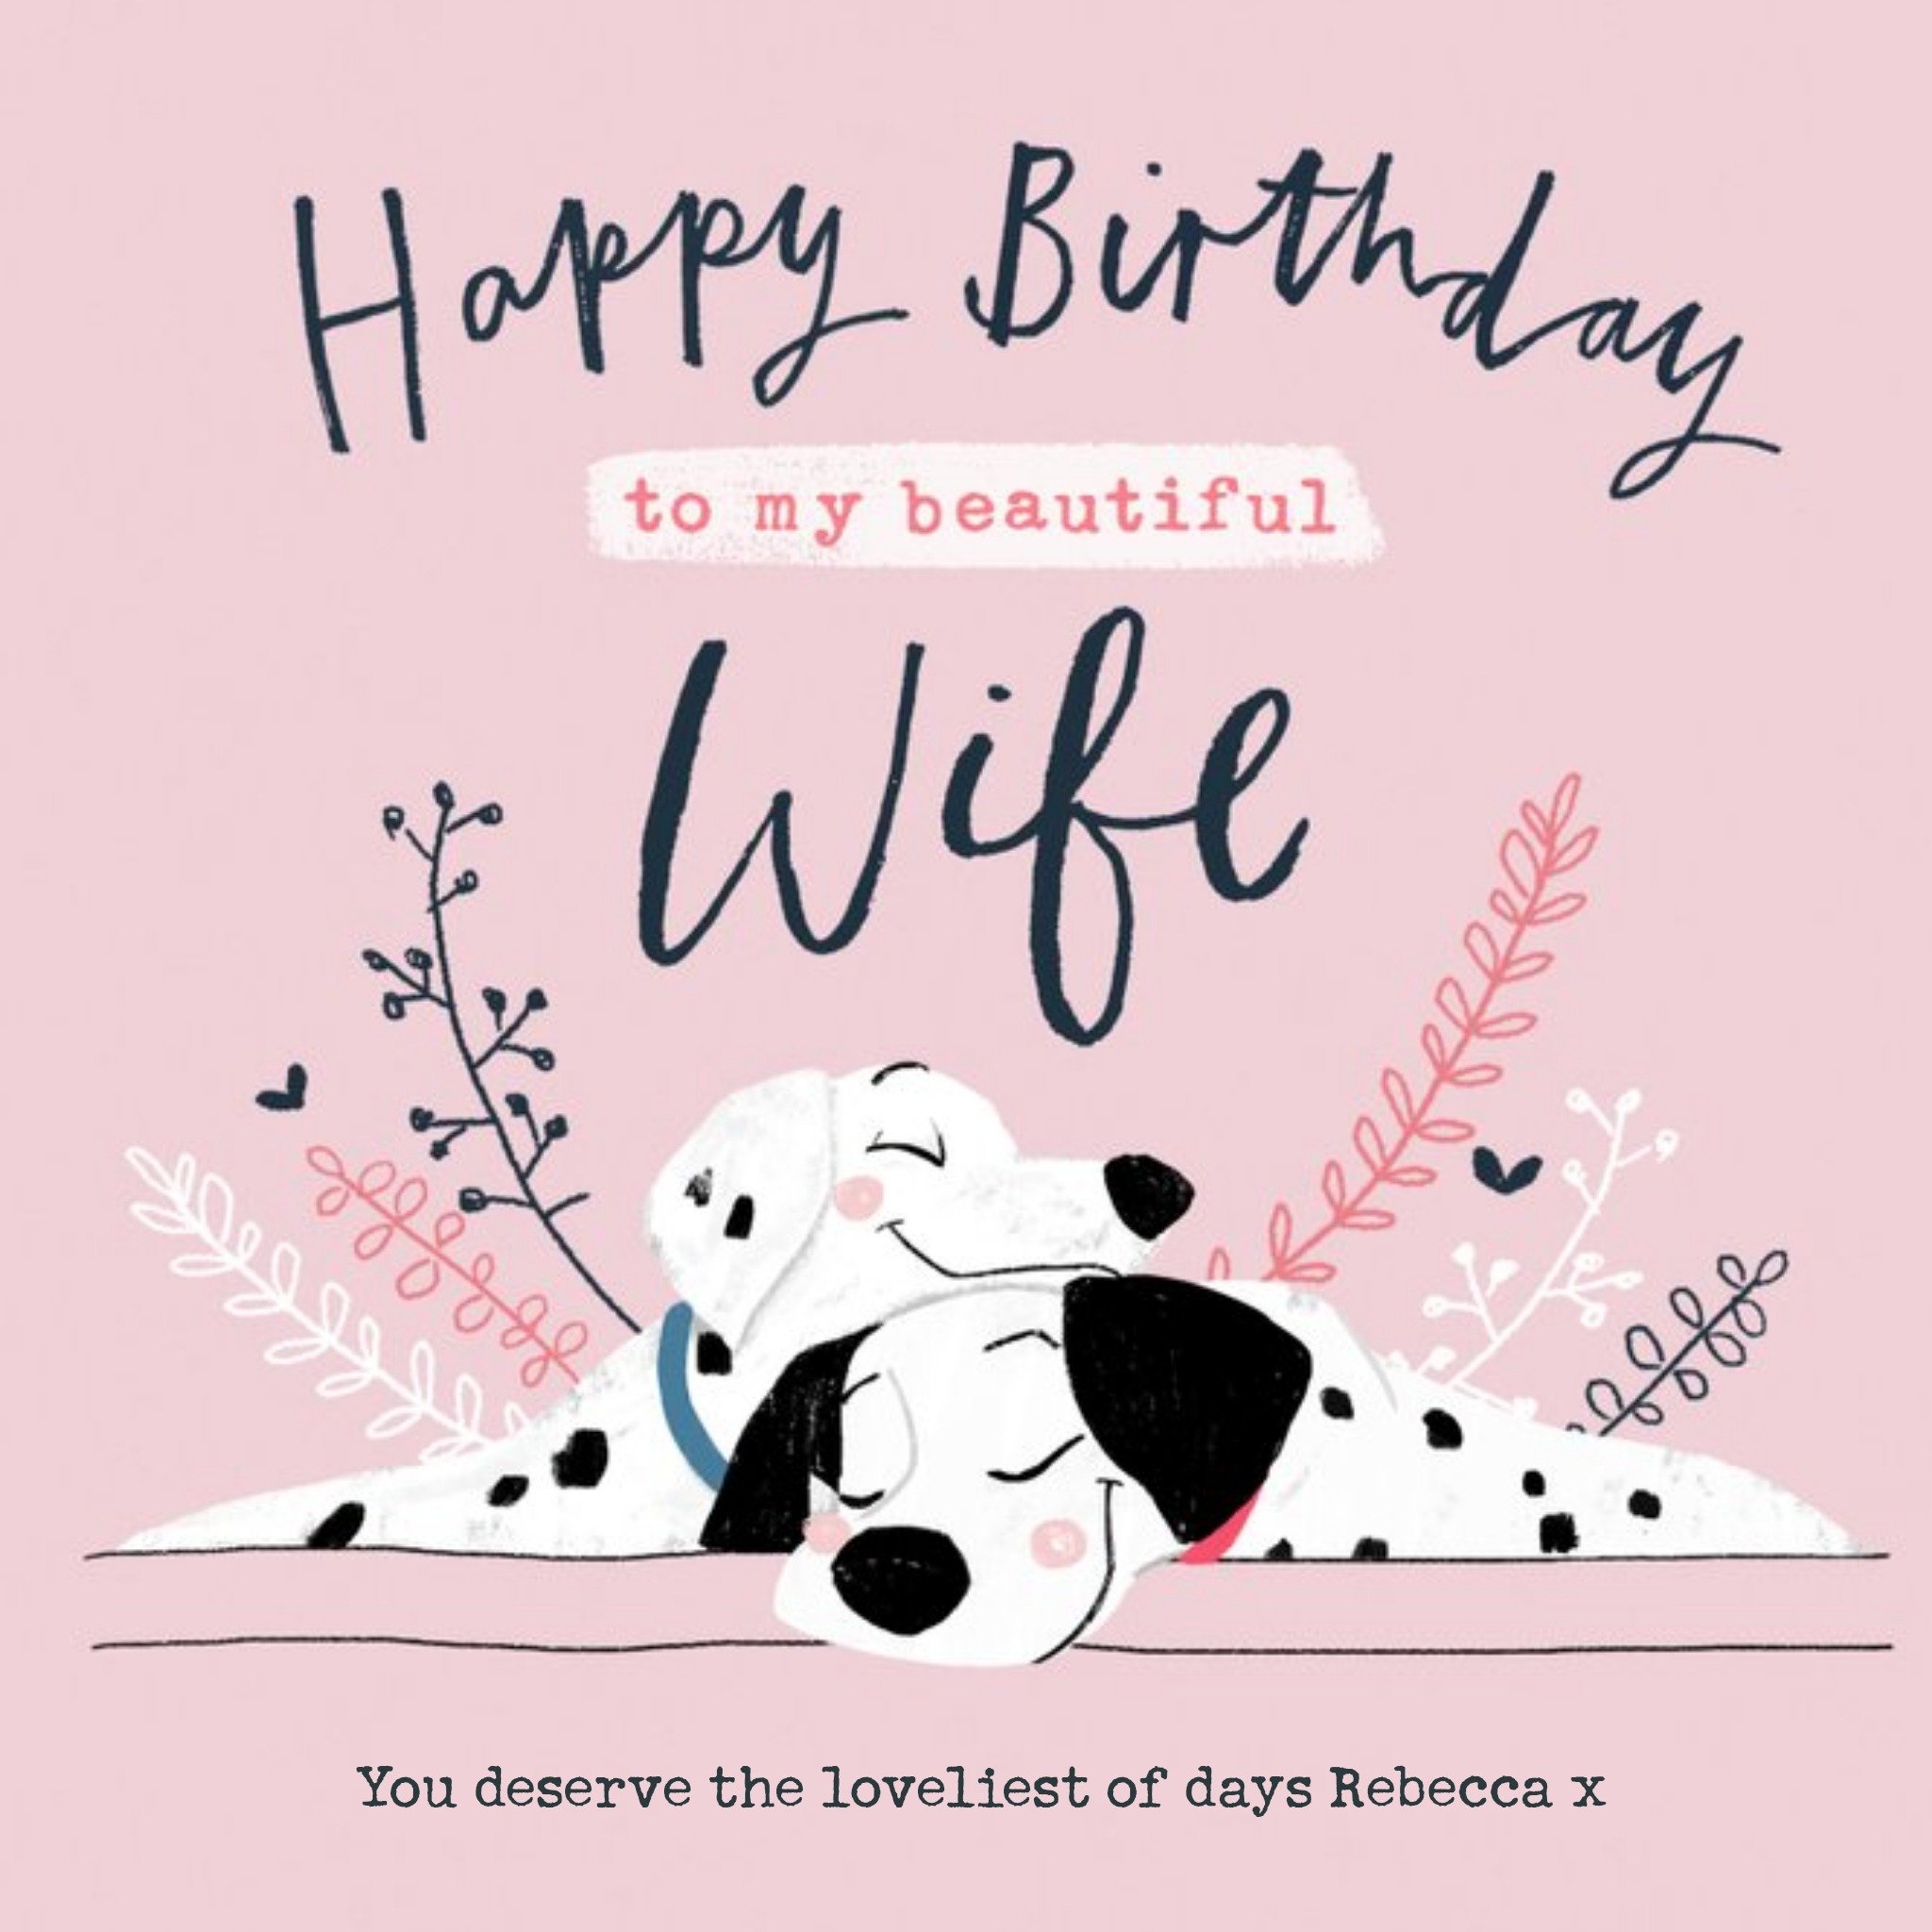 Beautiful Wife, You Deserve The Loveliest Of Days - Disney 101 Dalmatians Illustrated Birthday Card,